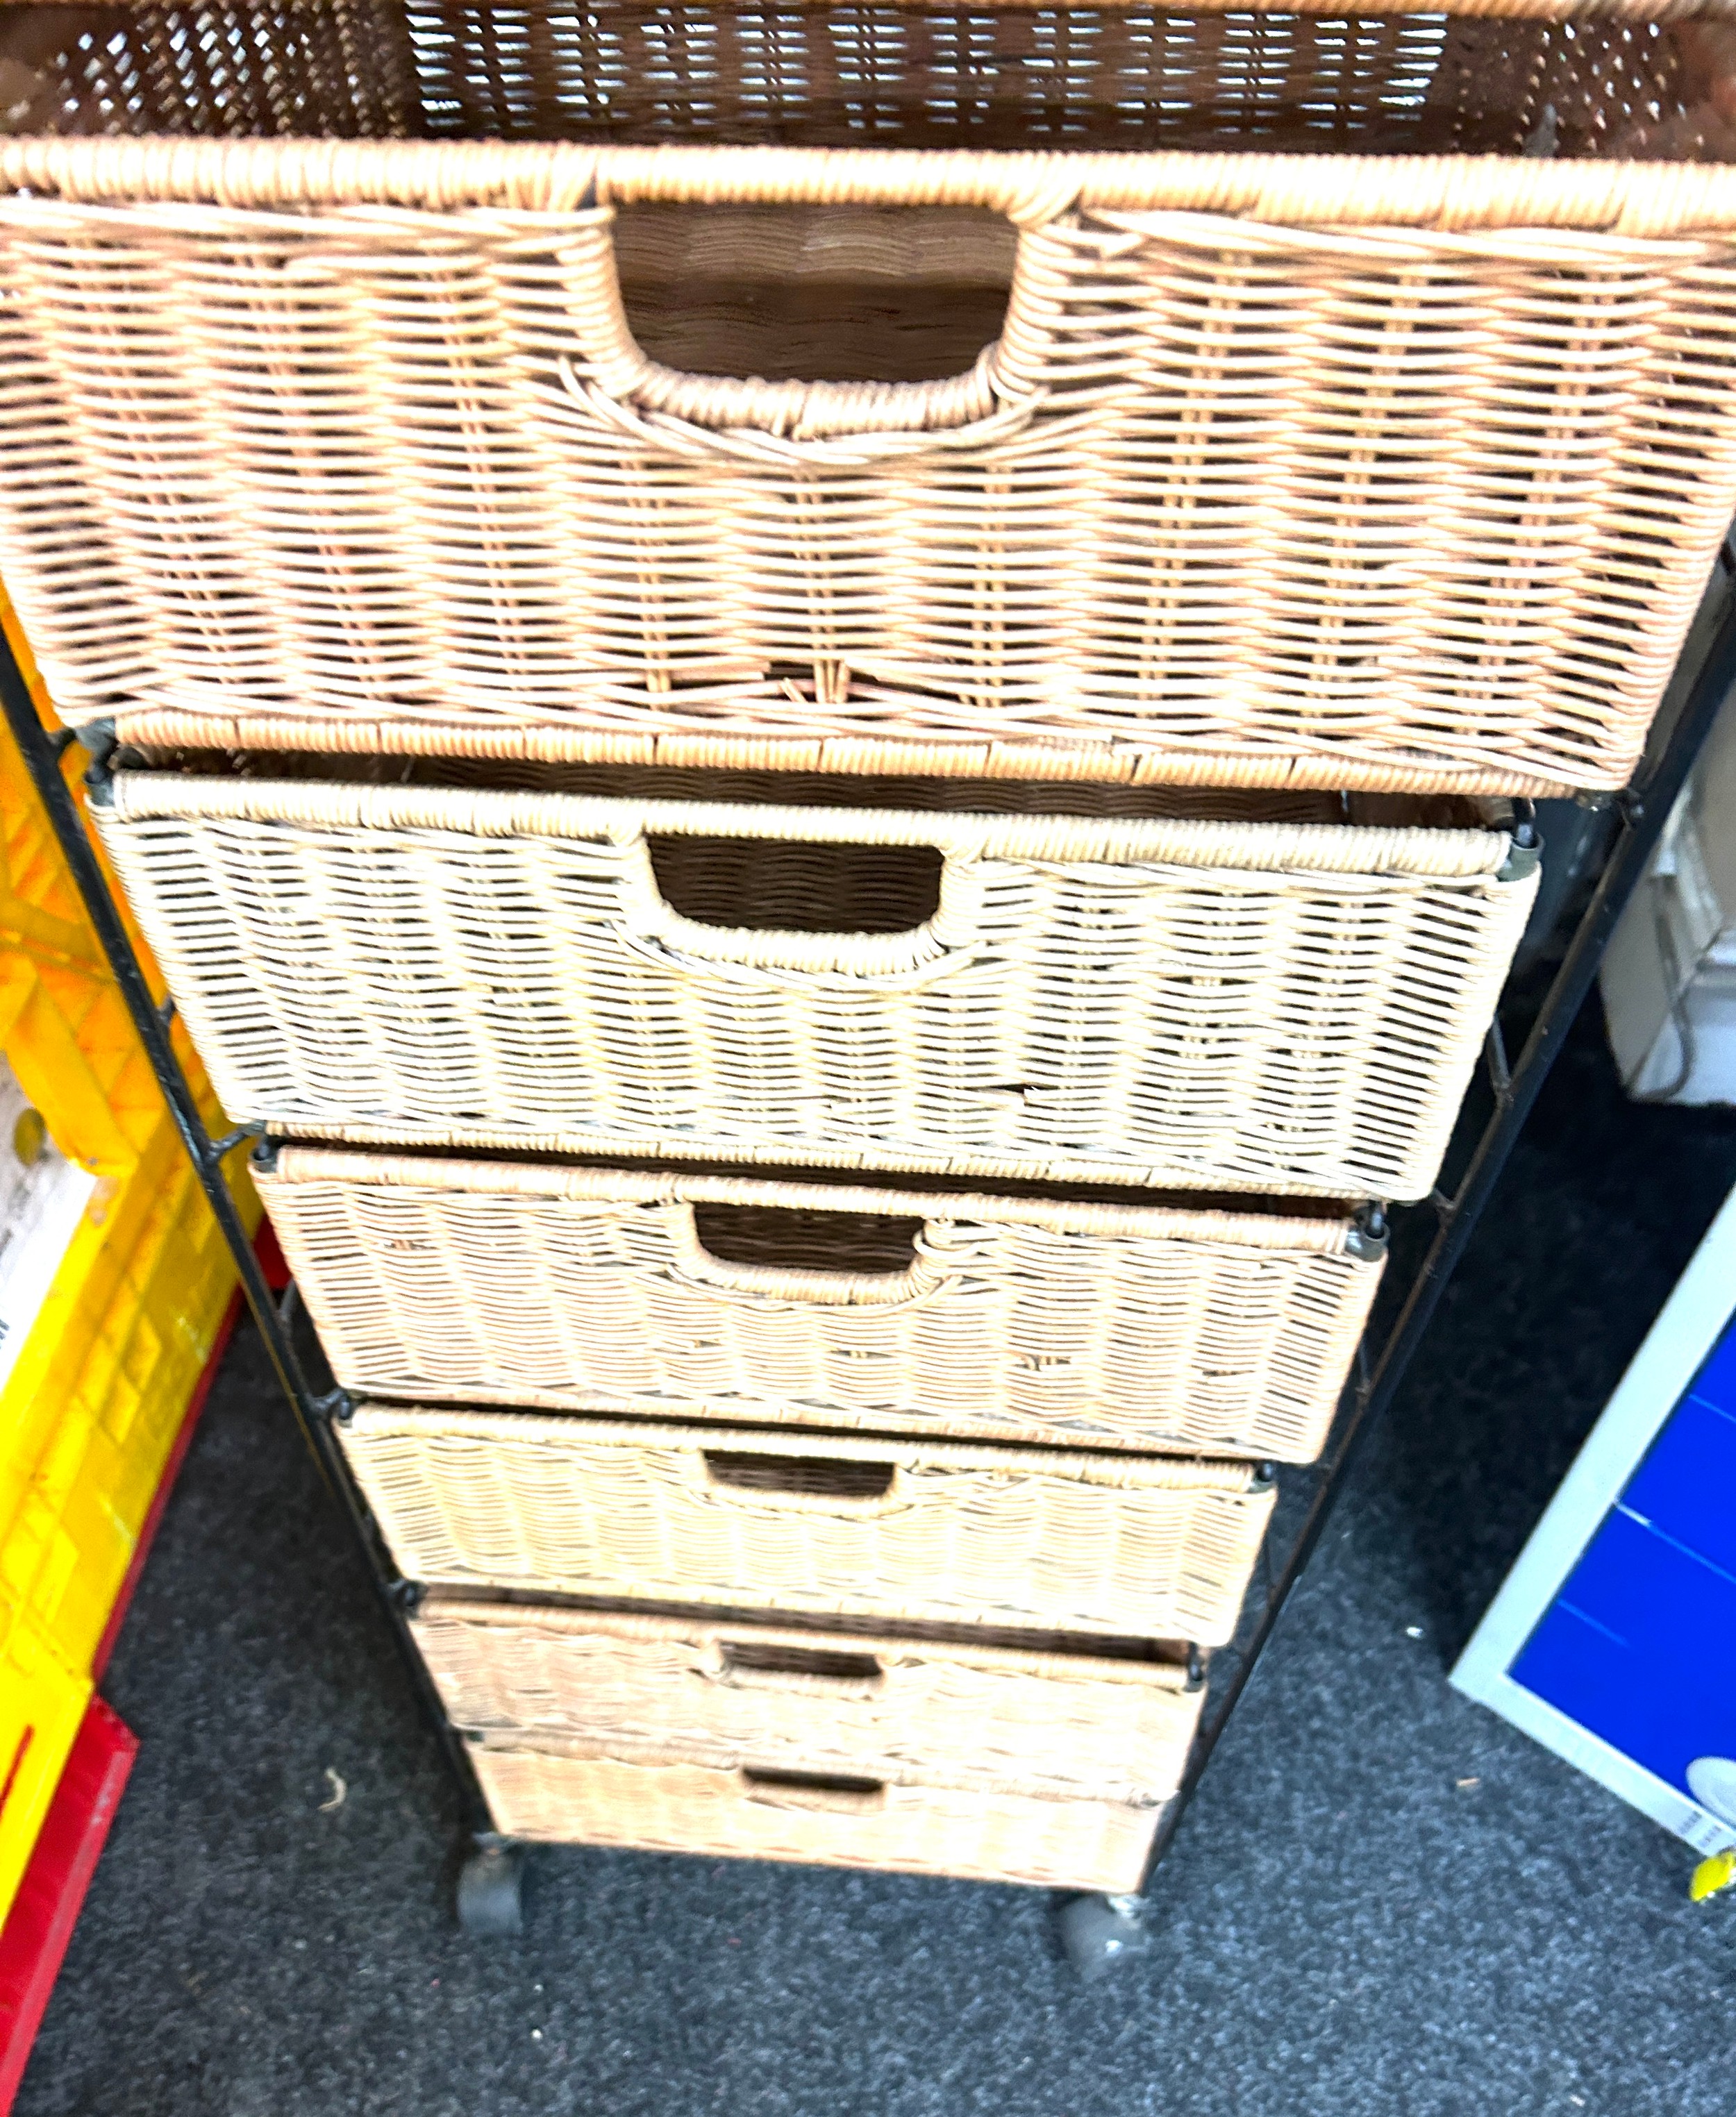 9 drawer metal and wicker storage drawers measures approx 59 inches tall by 16 inches wide and 14 - Image 3 of 3